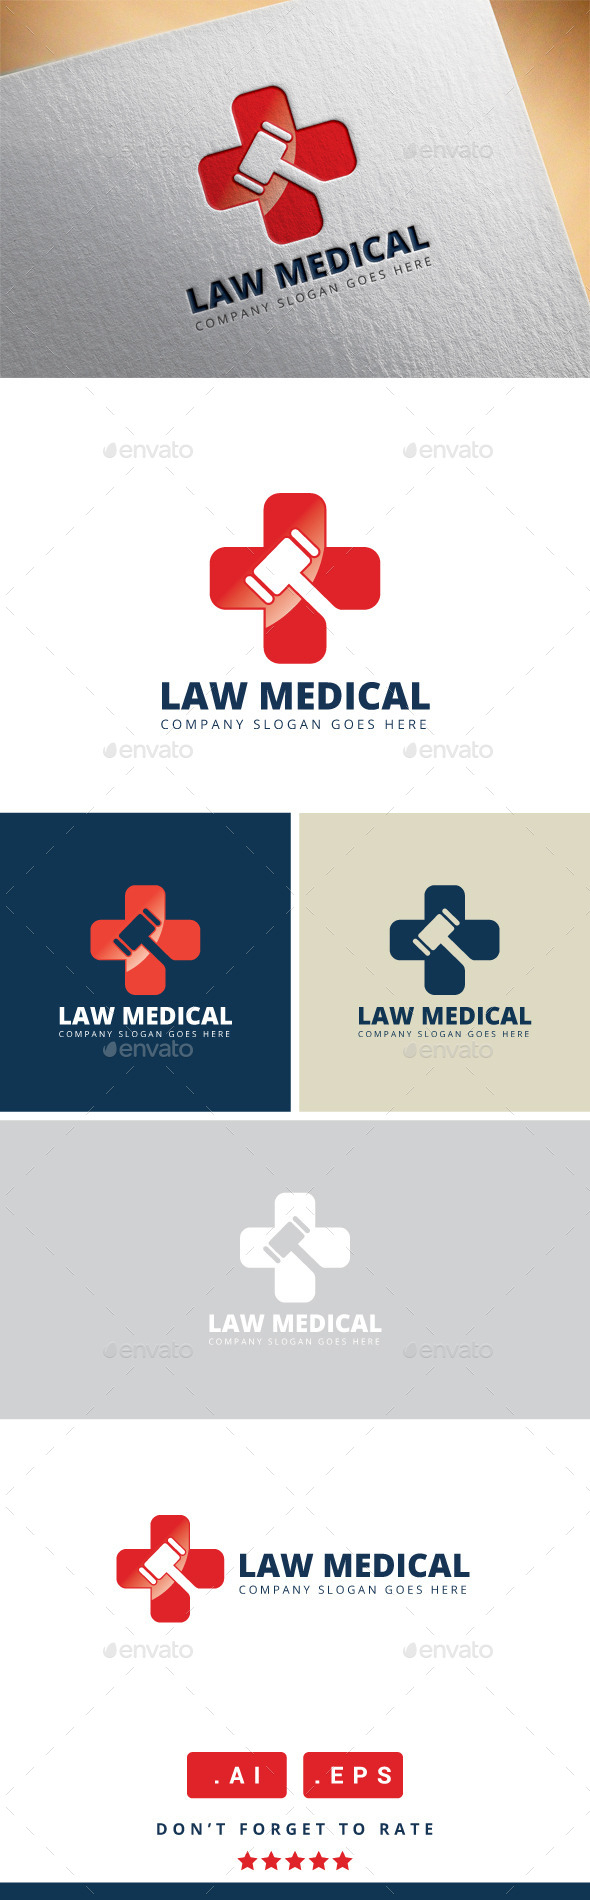 Medical Logo Templates From Graphicriver (Page 3) Regarding Med Cards Template